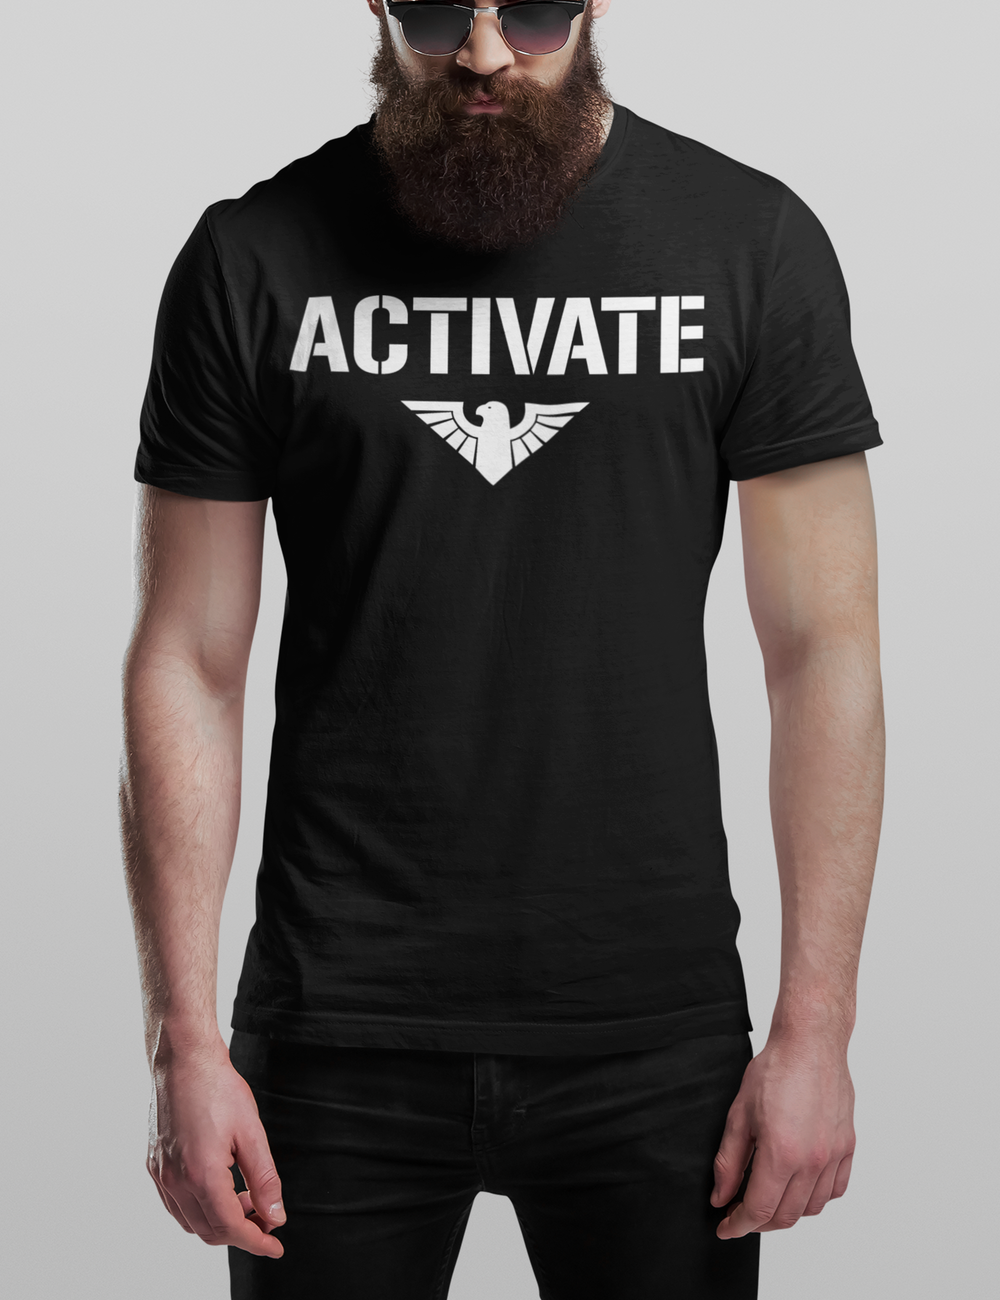 Activate | Men's Fitted T-Shirt OniTakai